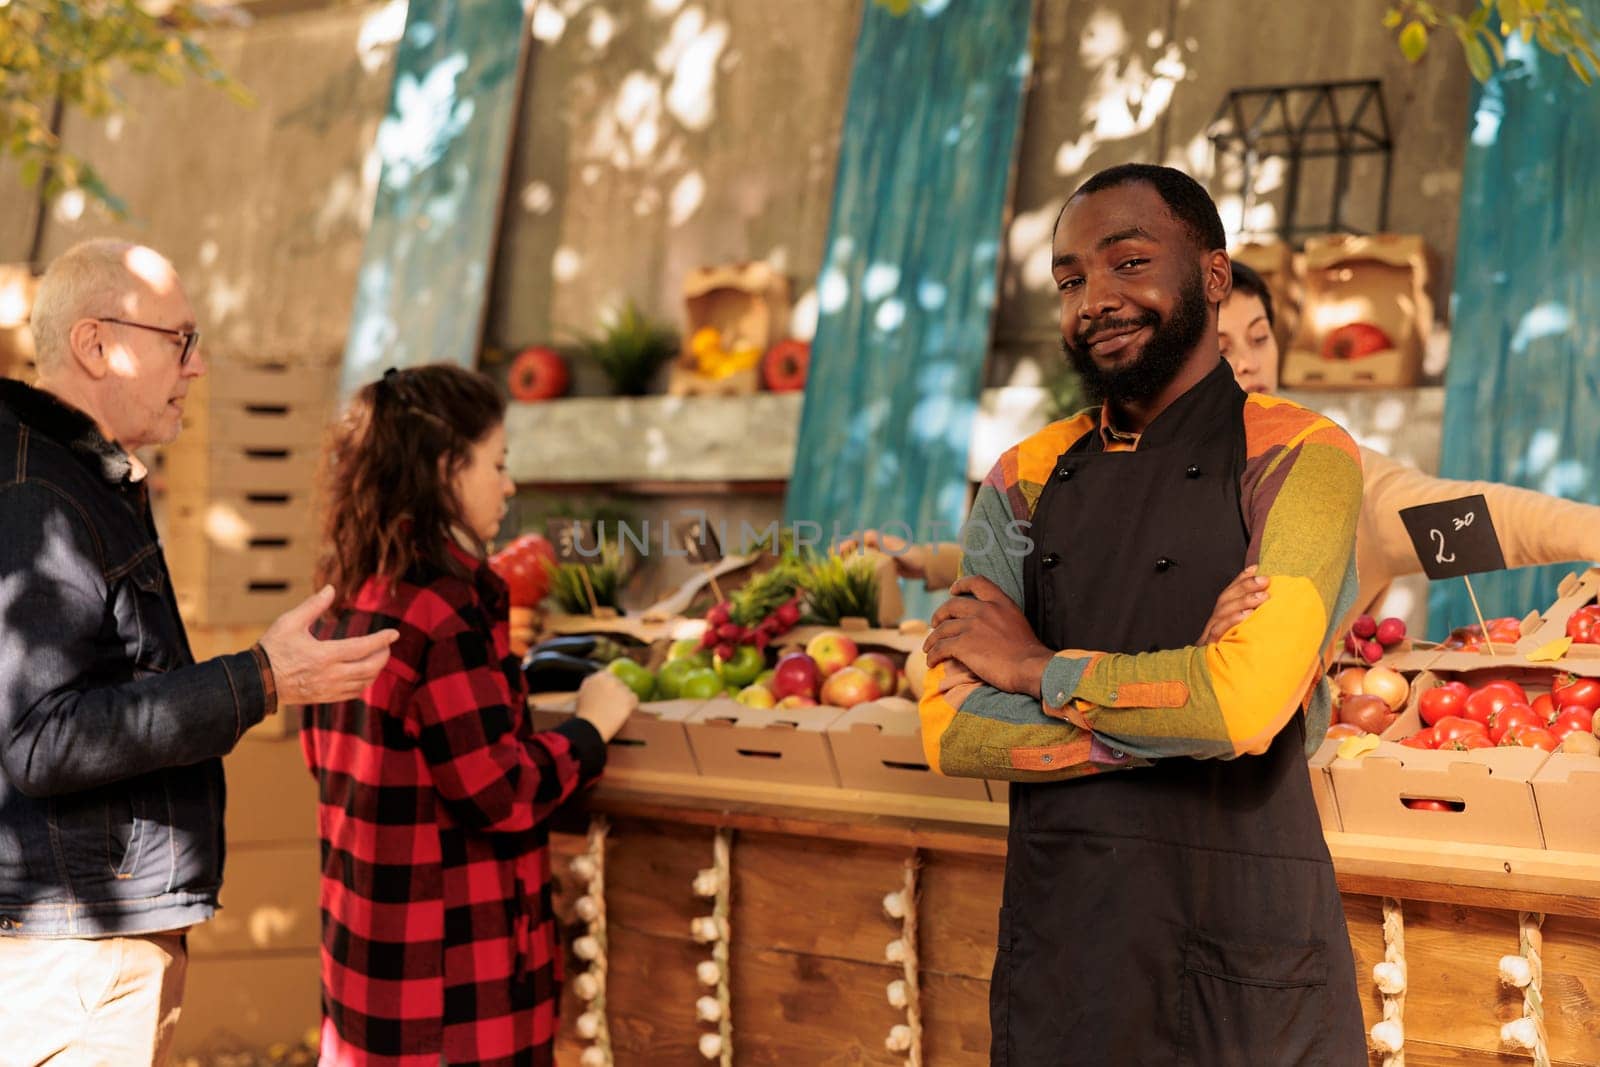 African american farmer standing next to food marketplace stand, selling healthy organic products. Young man with fresh natural fruits and vegetables, seasonal locally grown veggies.